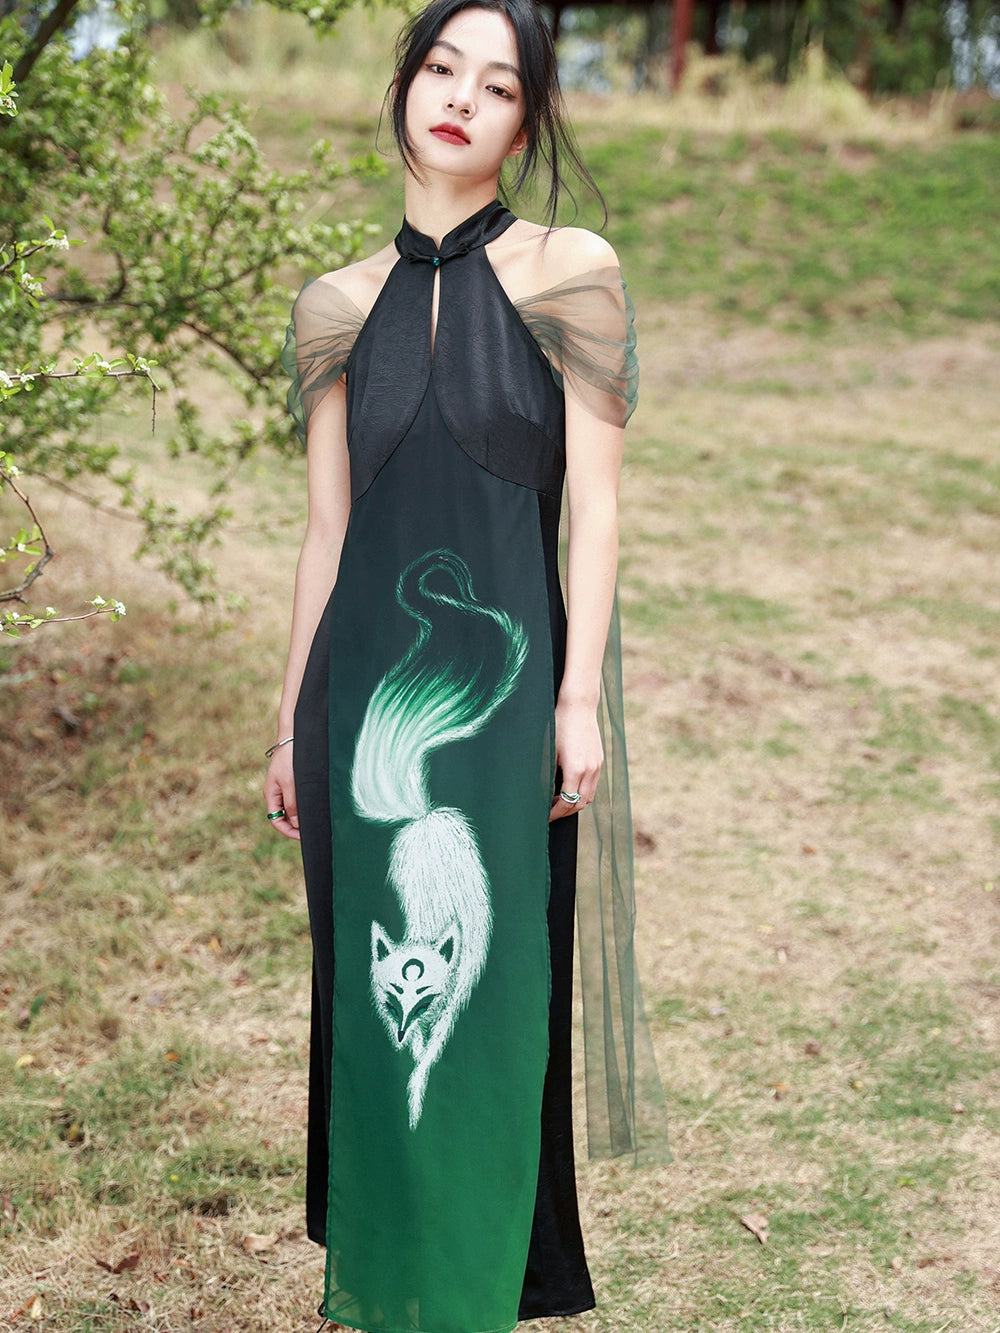 Discover our exquisite collection of cheongsam dresses, including elegant black cheongsam dress, vibrant green cheongsam, and luxurious silk cheongsam. Our range features both long cheongsam and chic mini cheongsam dress options, perfect for formal events and casual outings